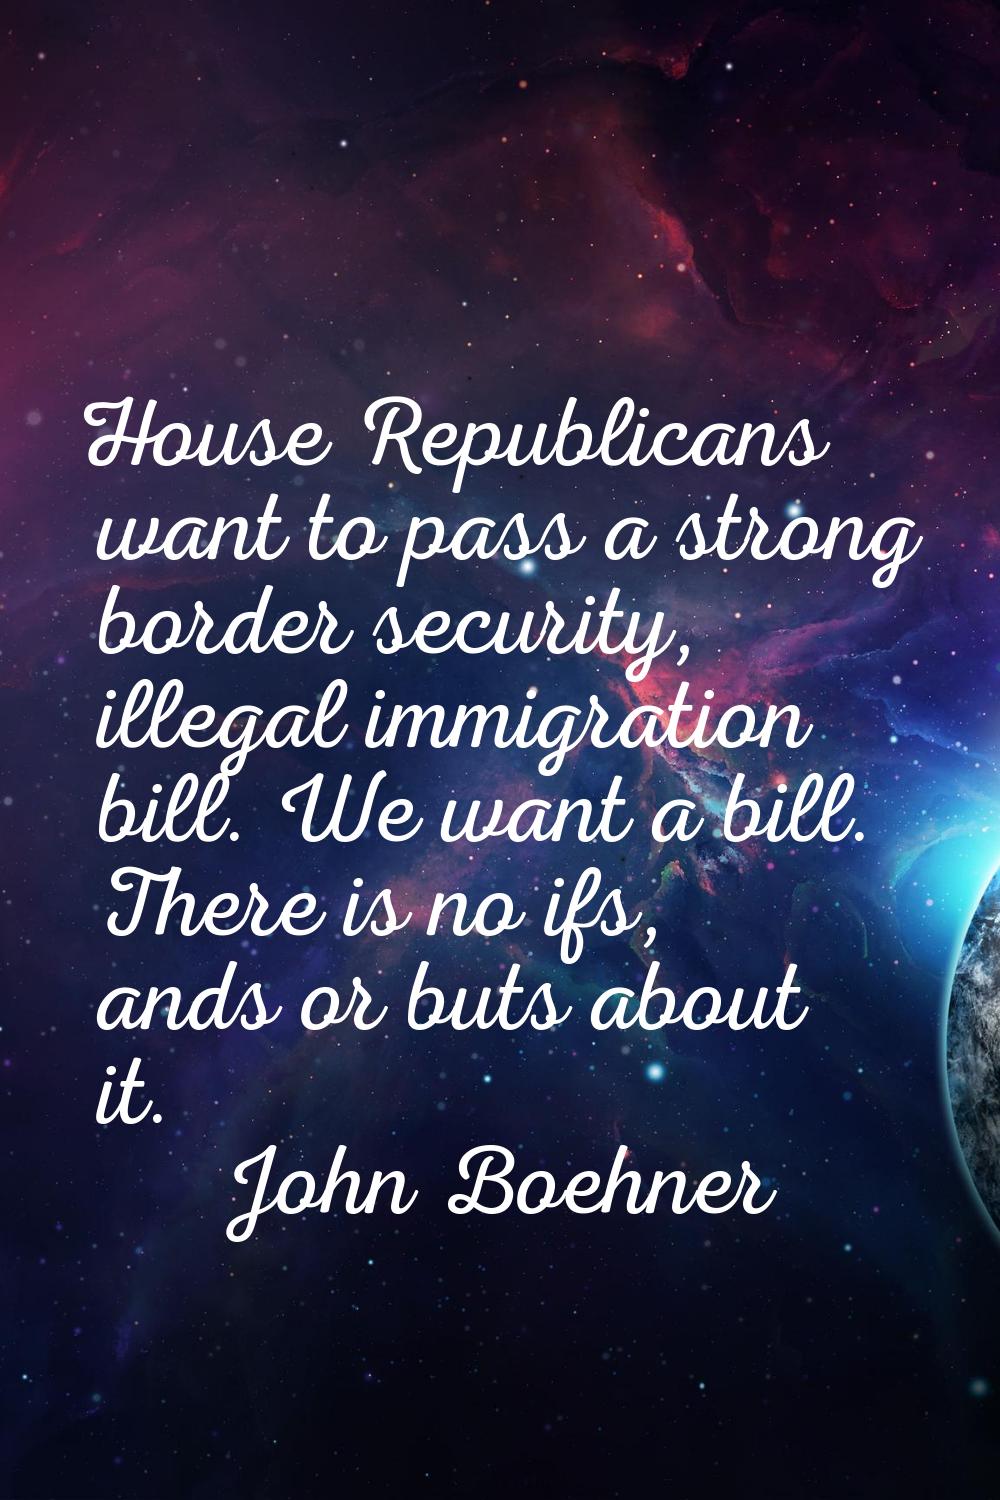 House Republicans want to pass a strong border security, illegal immigration bill. We want a bill. 